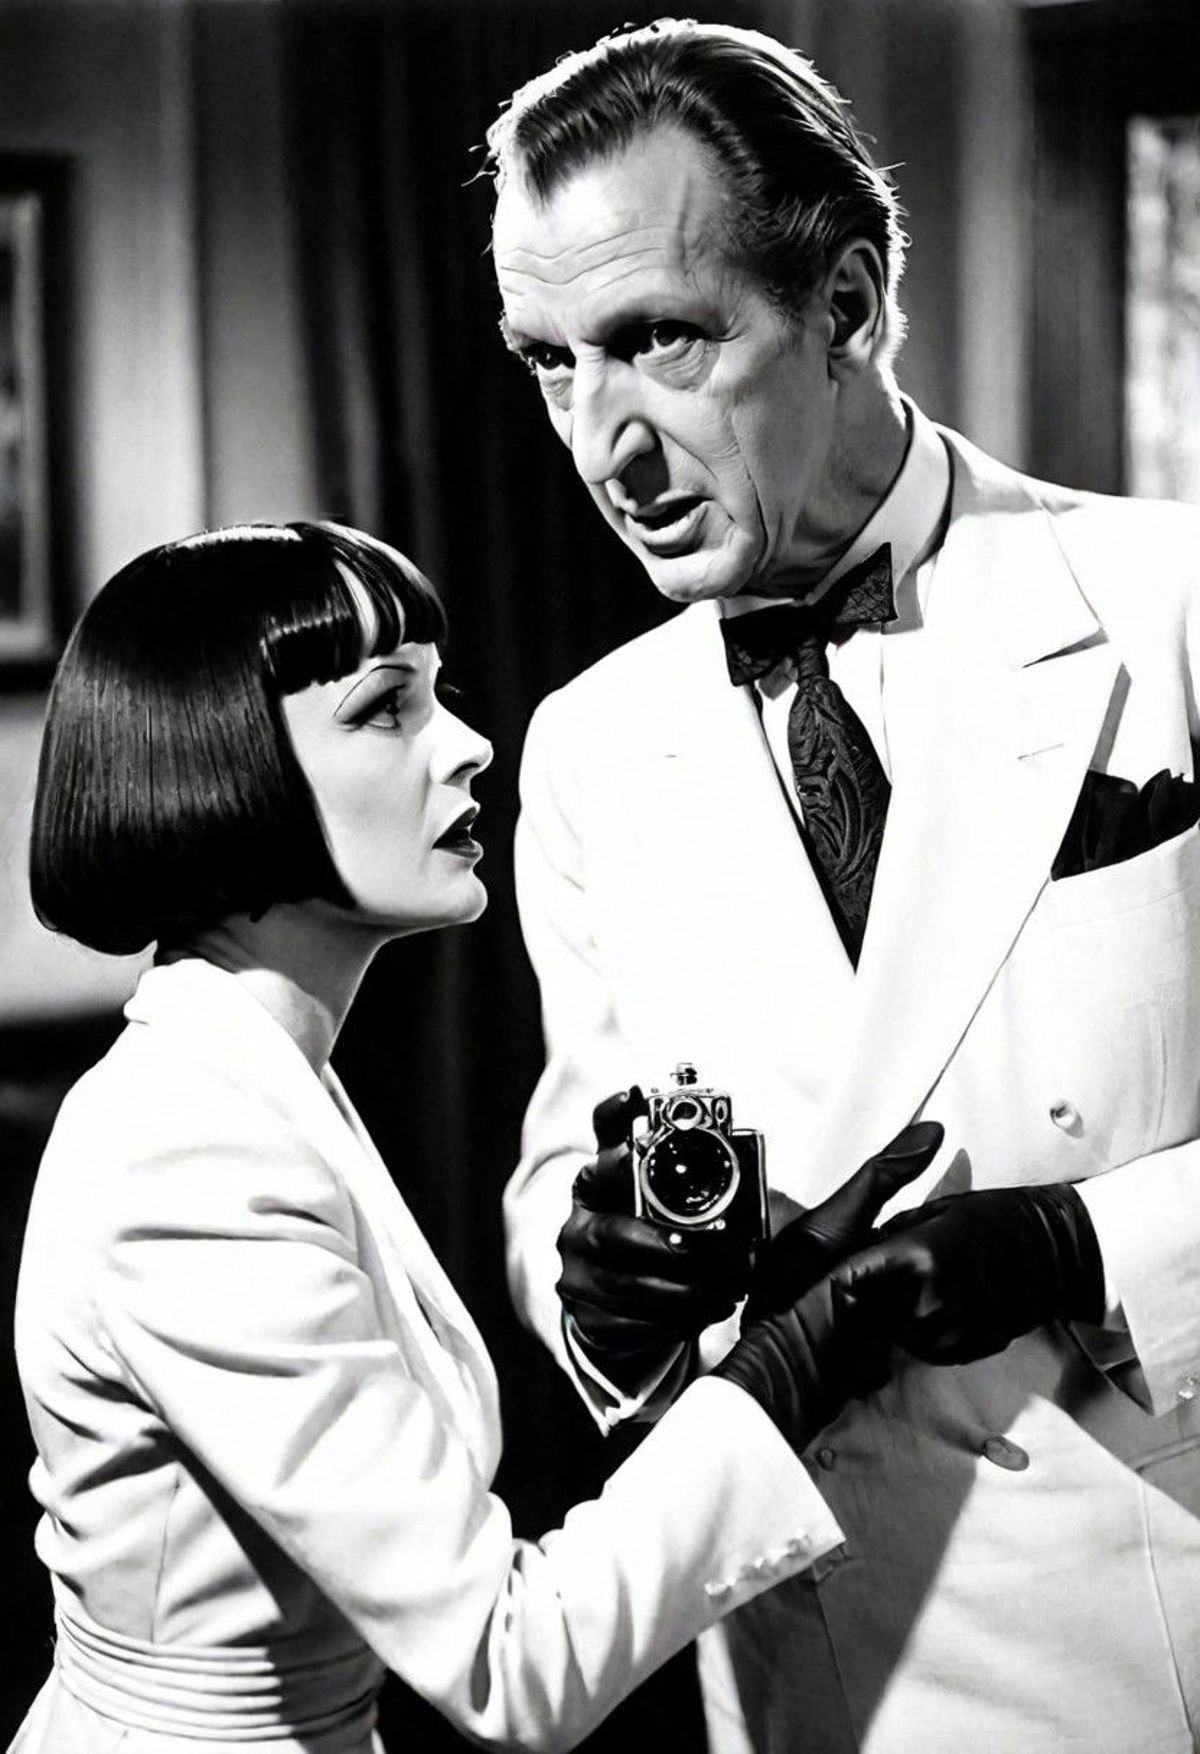 A man and woman dressed in black and white clothing, with the man holding a camera.